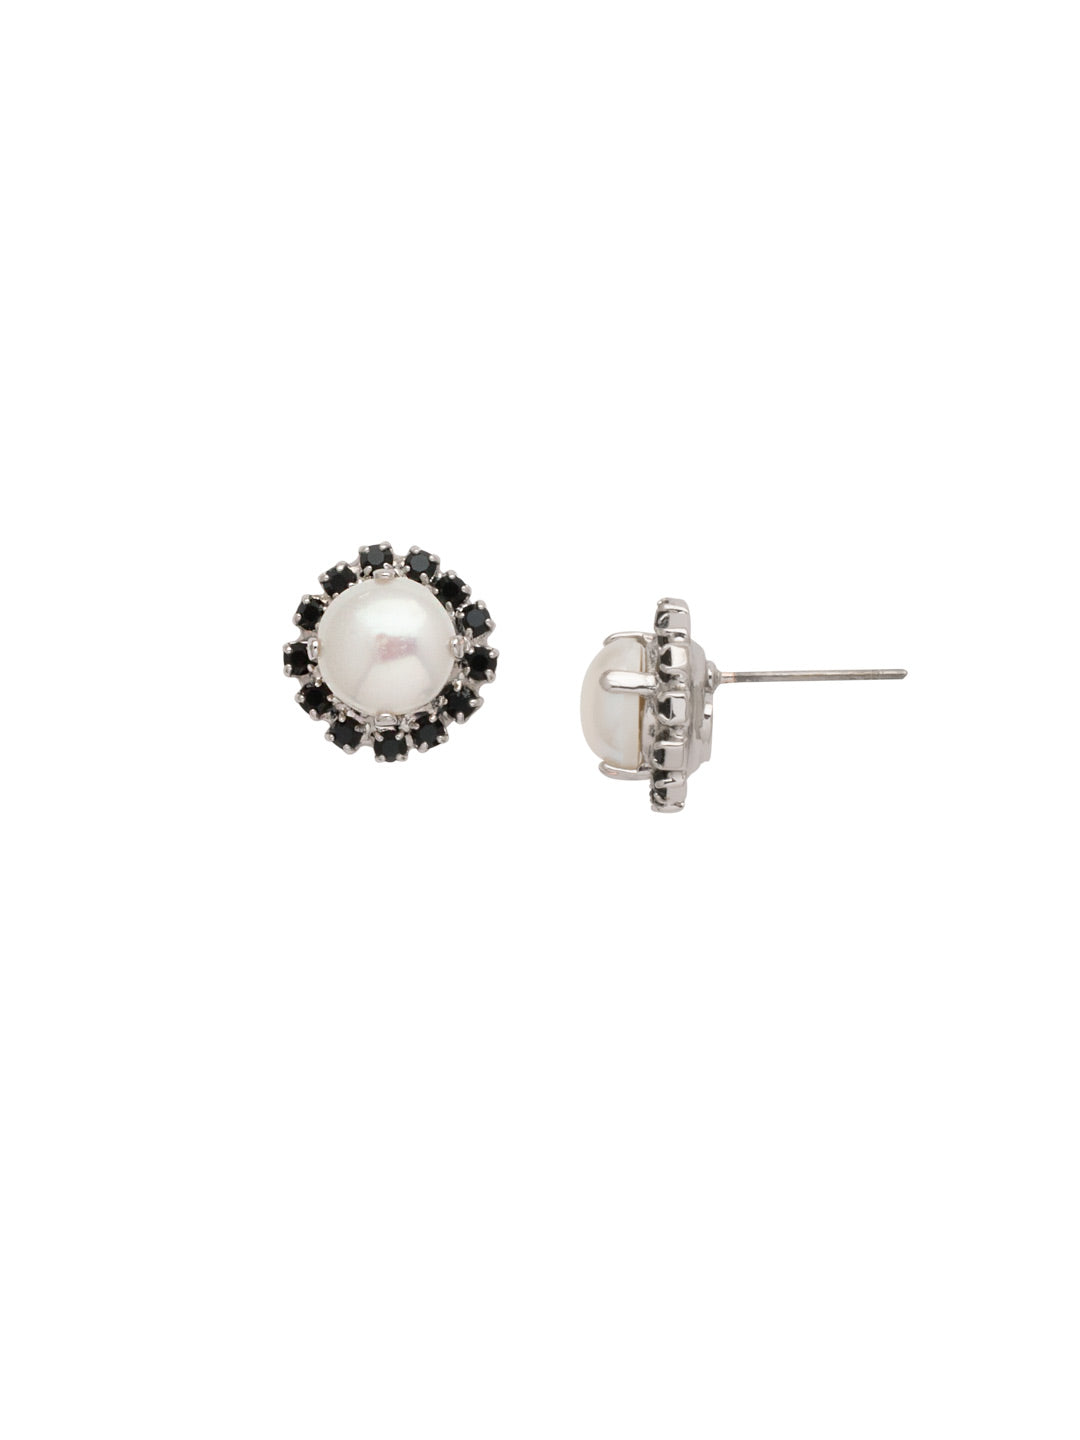 Haute Halo Stud Earring - EEY10PDSNI - <p>The Haute Halo Stud Earrings are in instant favorite; a round cut crystal sits in a halo setting, complete with a comfortable post and monster backs. From Sorrelli's Starry Night collection in our Palladium finish.</p>